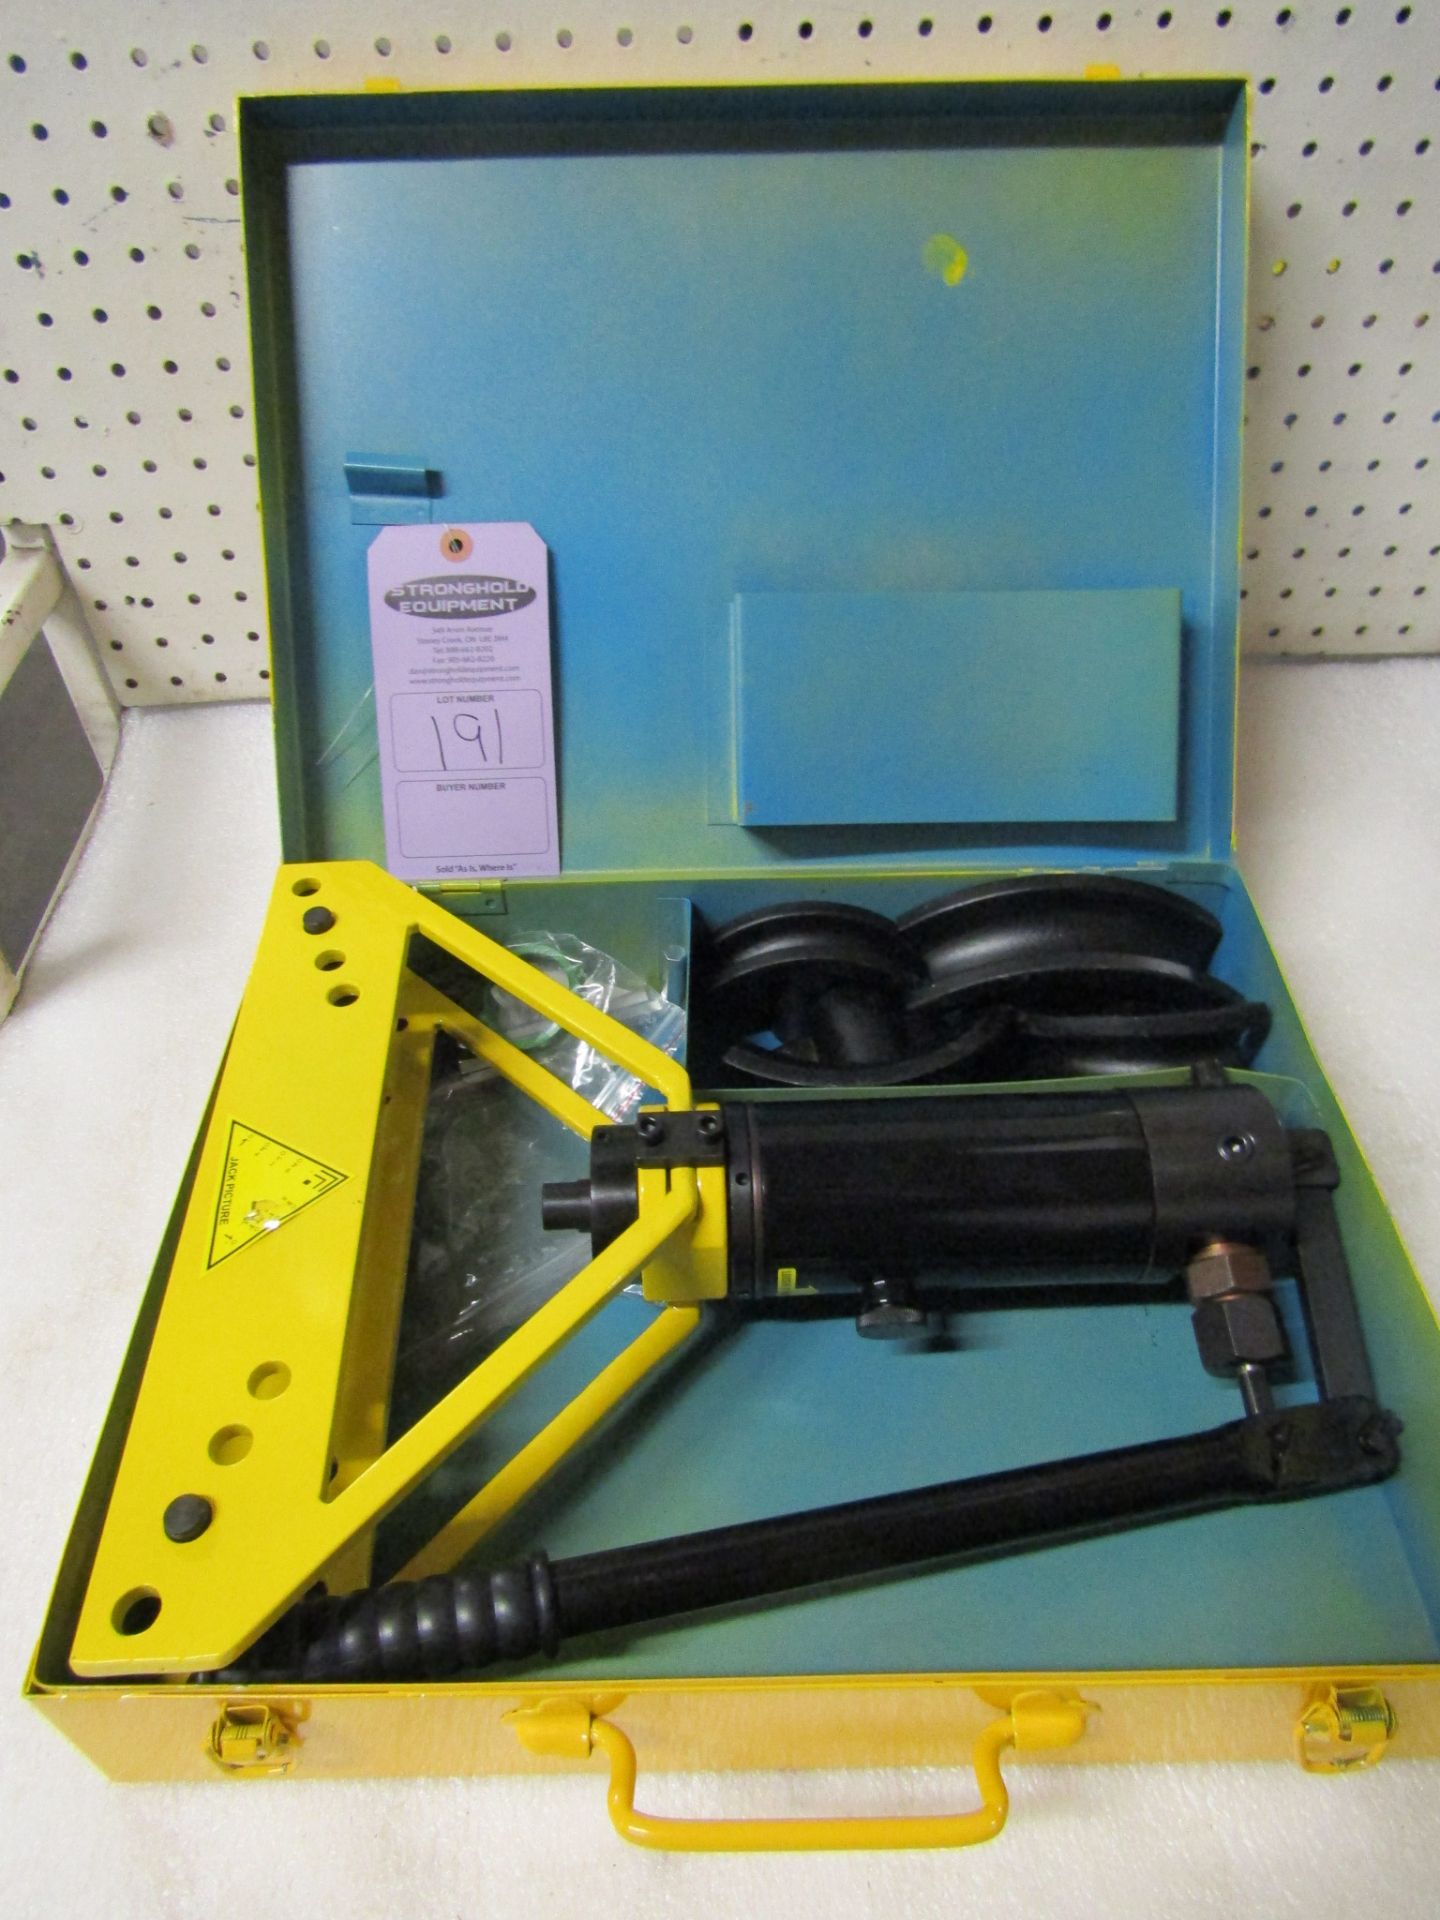 Power Team Hydraulics style tube Bender unit up to 1" capacity including dies in case - MINT, UNUSED - Image 2 of 2